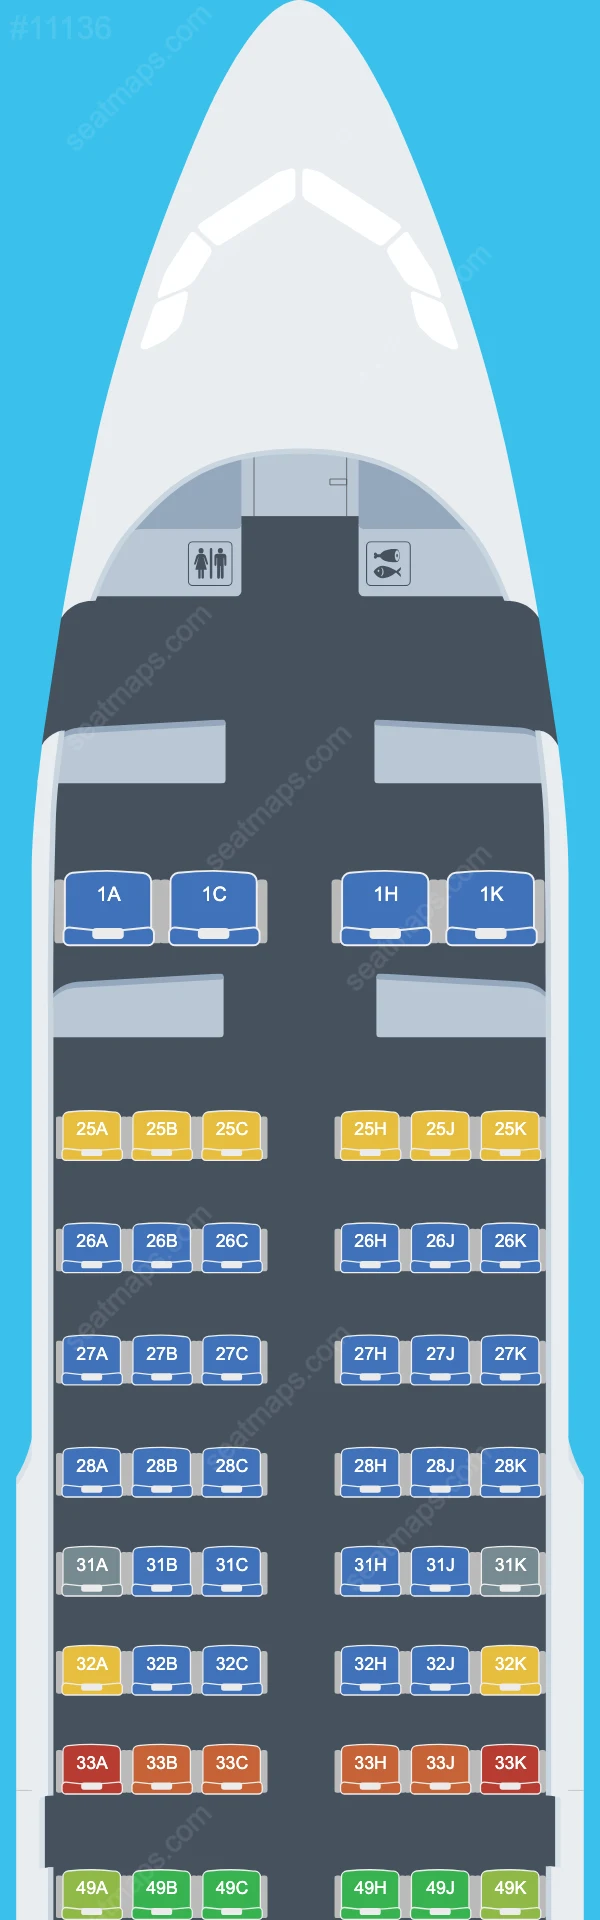 China Southern Airbus A319 Seat Maps A319-100neo